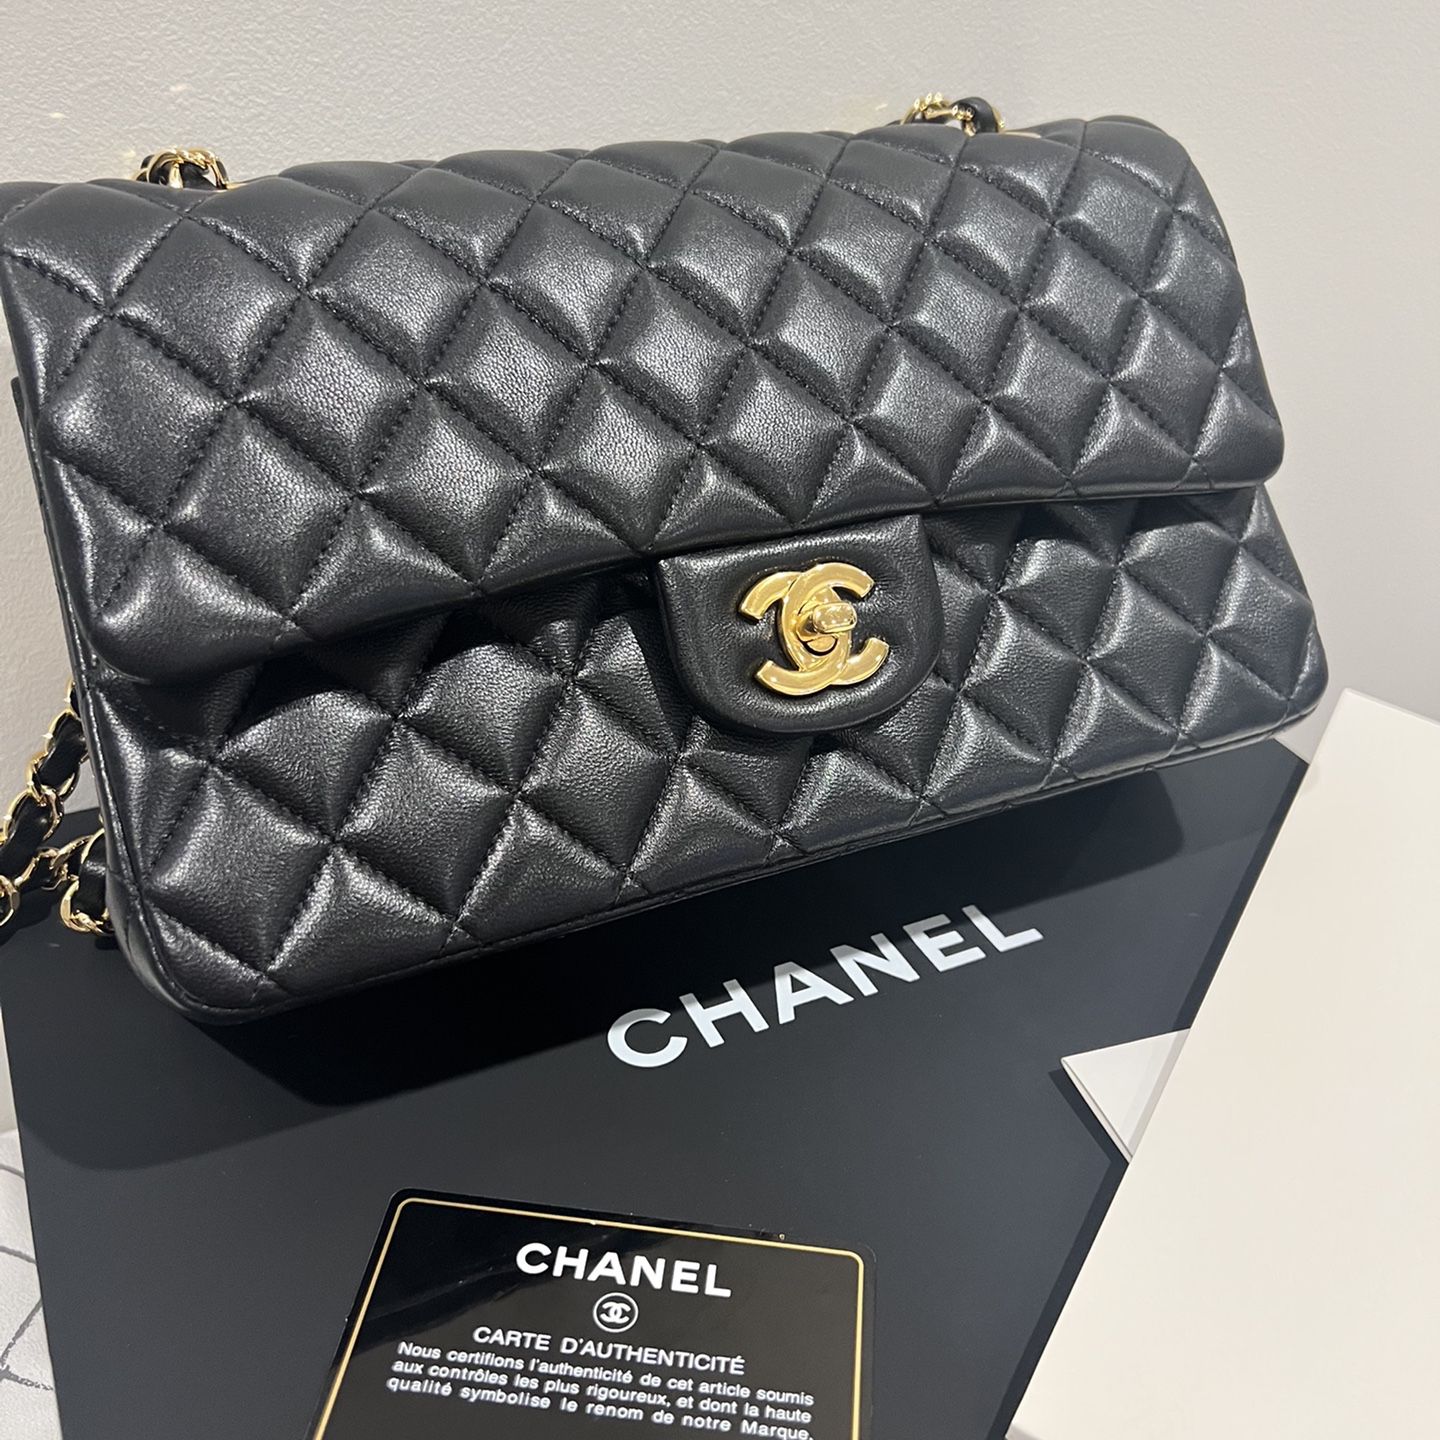 Chanel Classic Medium Double Flap Lambskin Bag for Sale in Irvine